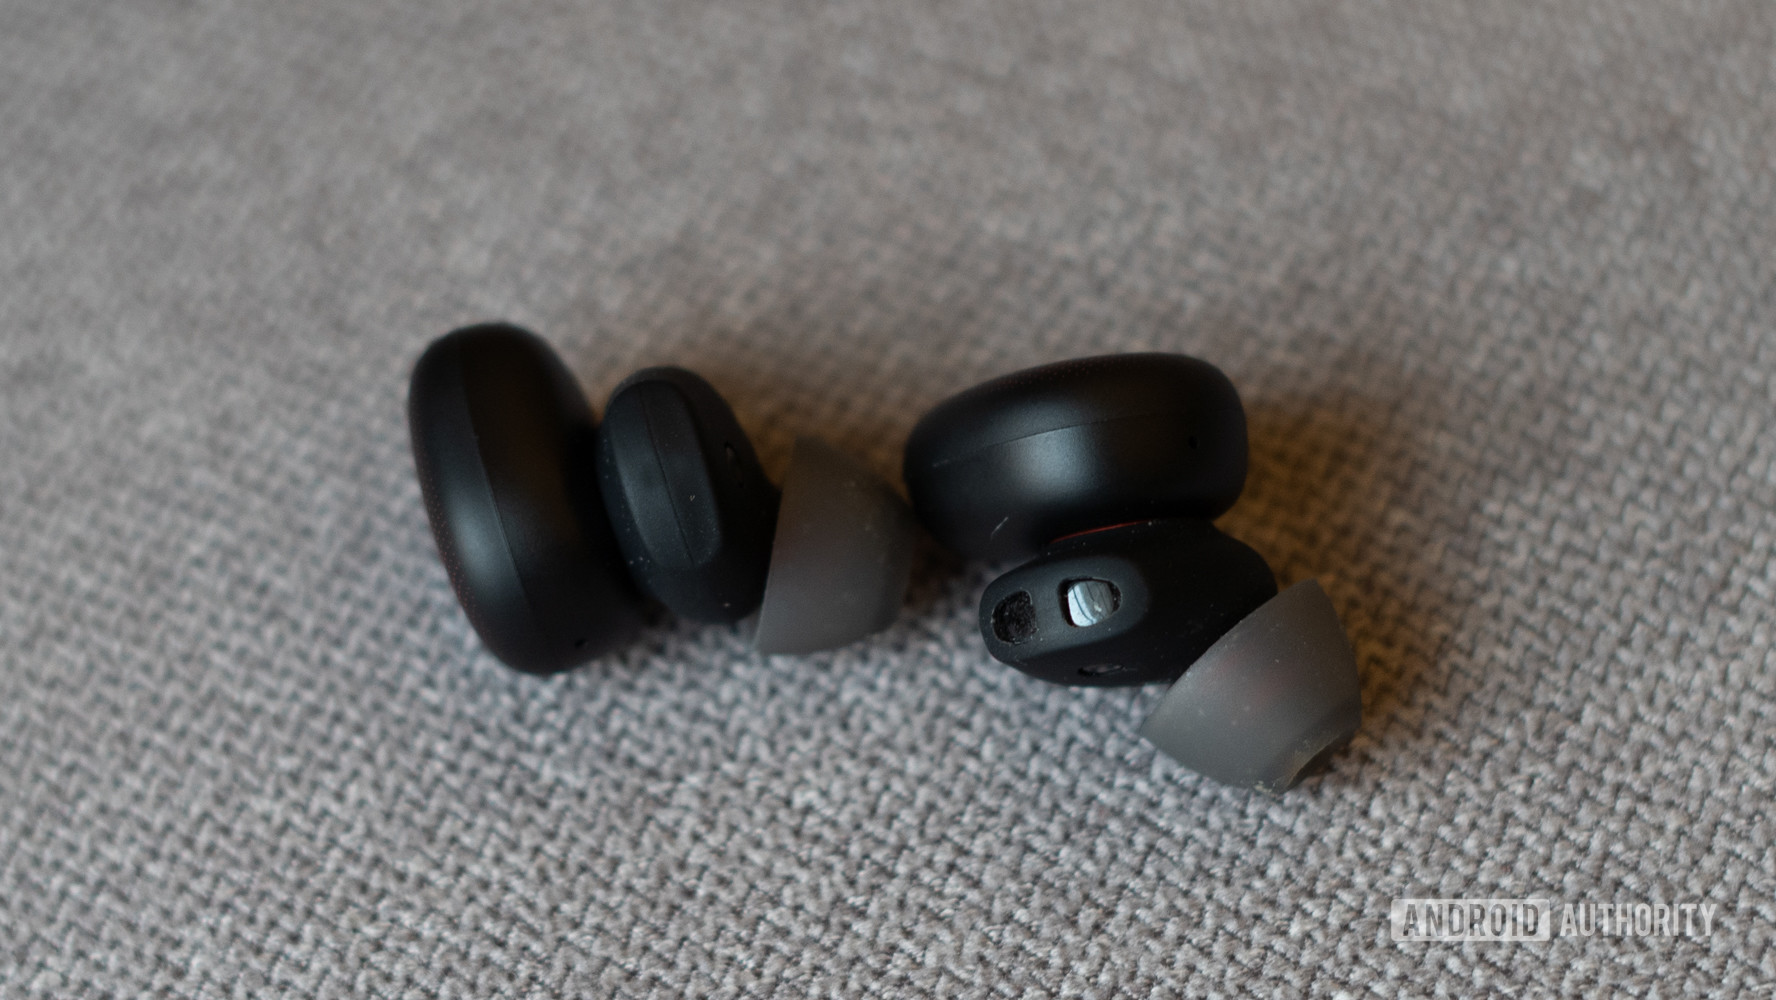 Amazfit Powerbuds Review with heart rate sensor visible